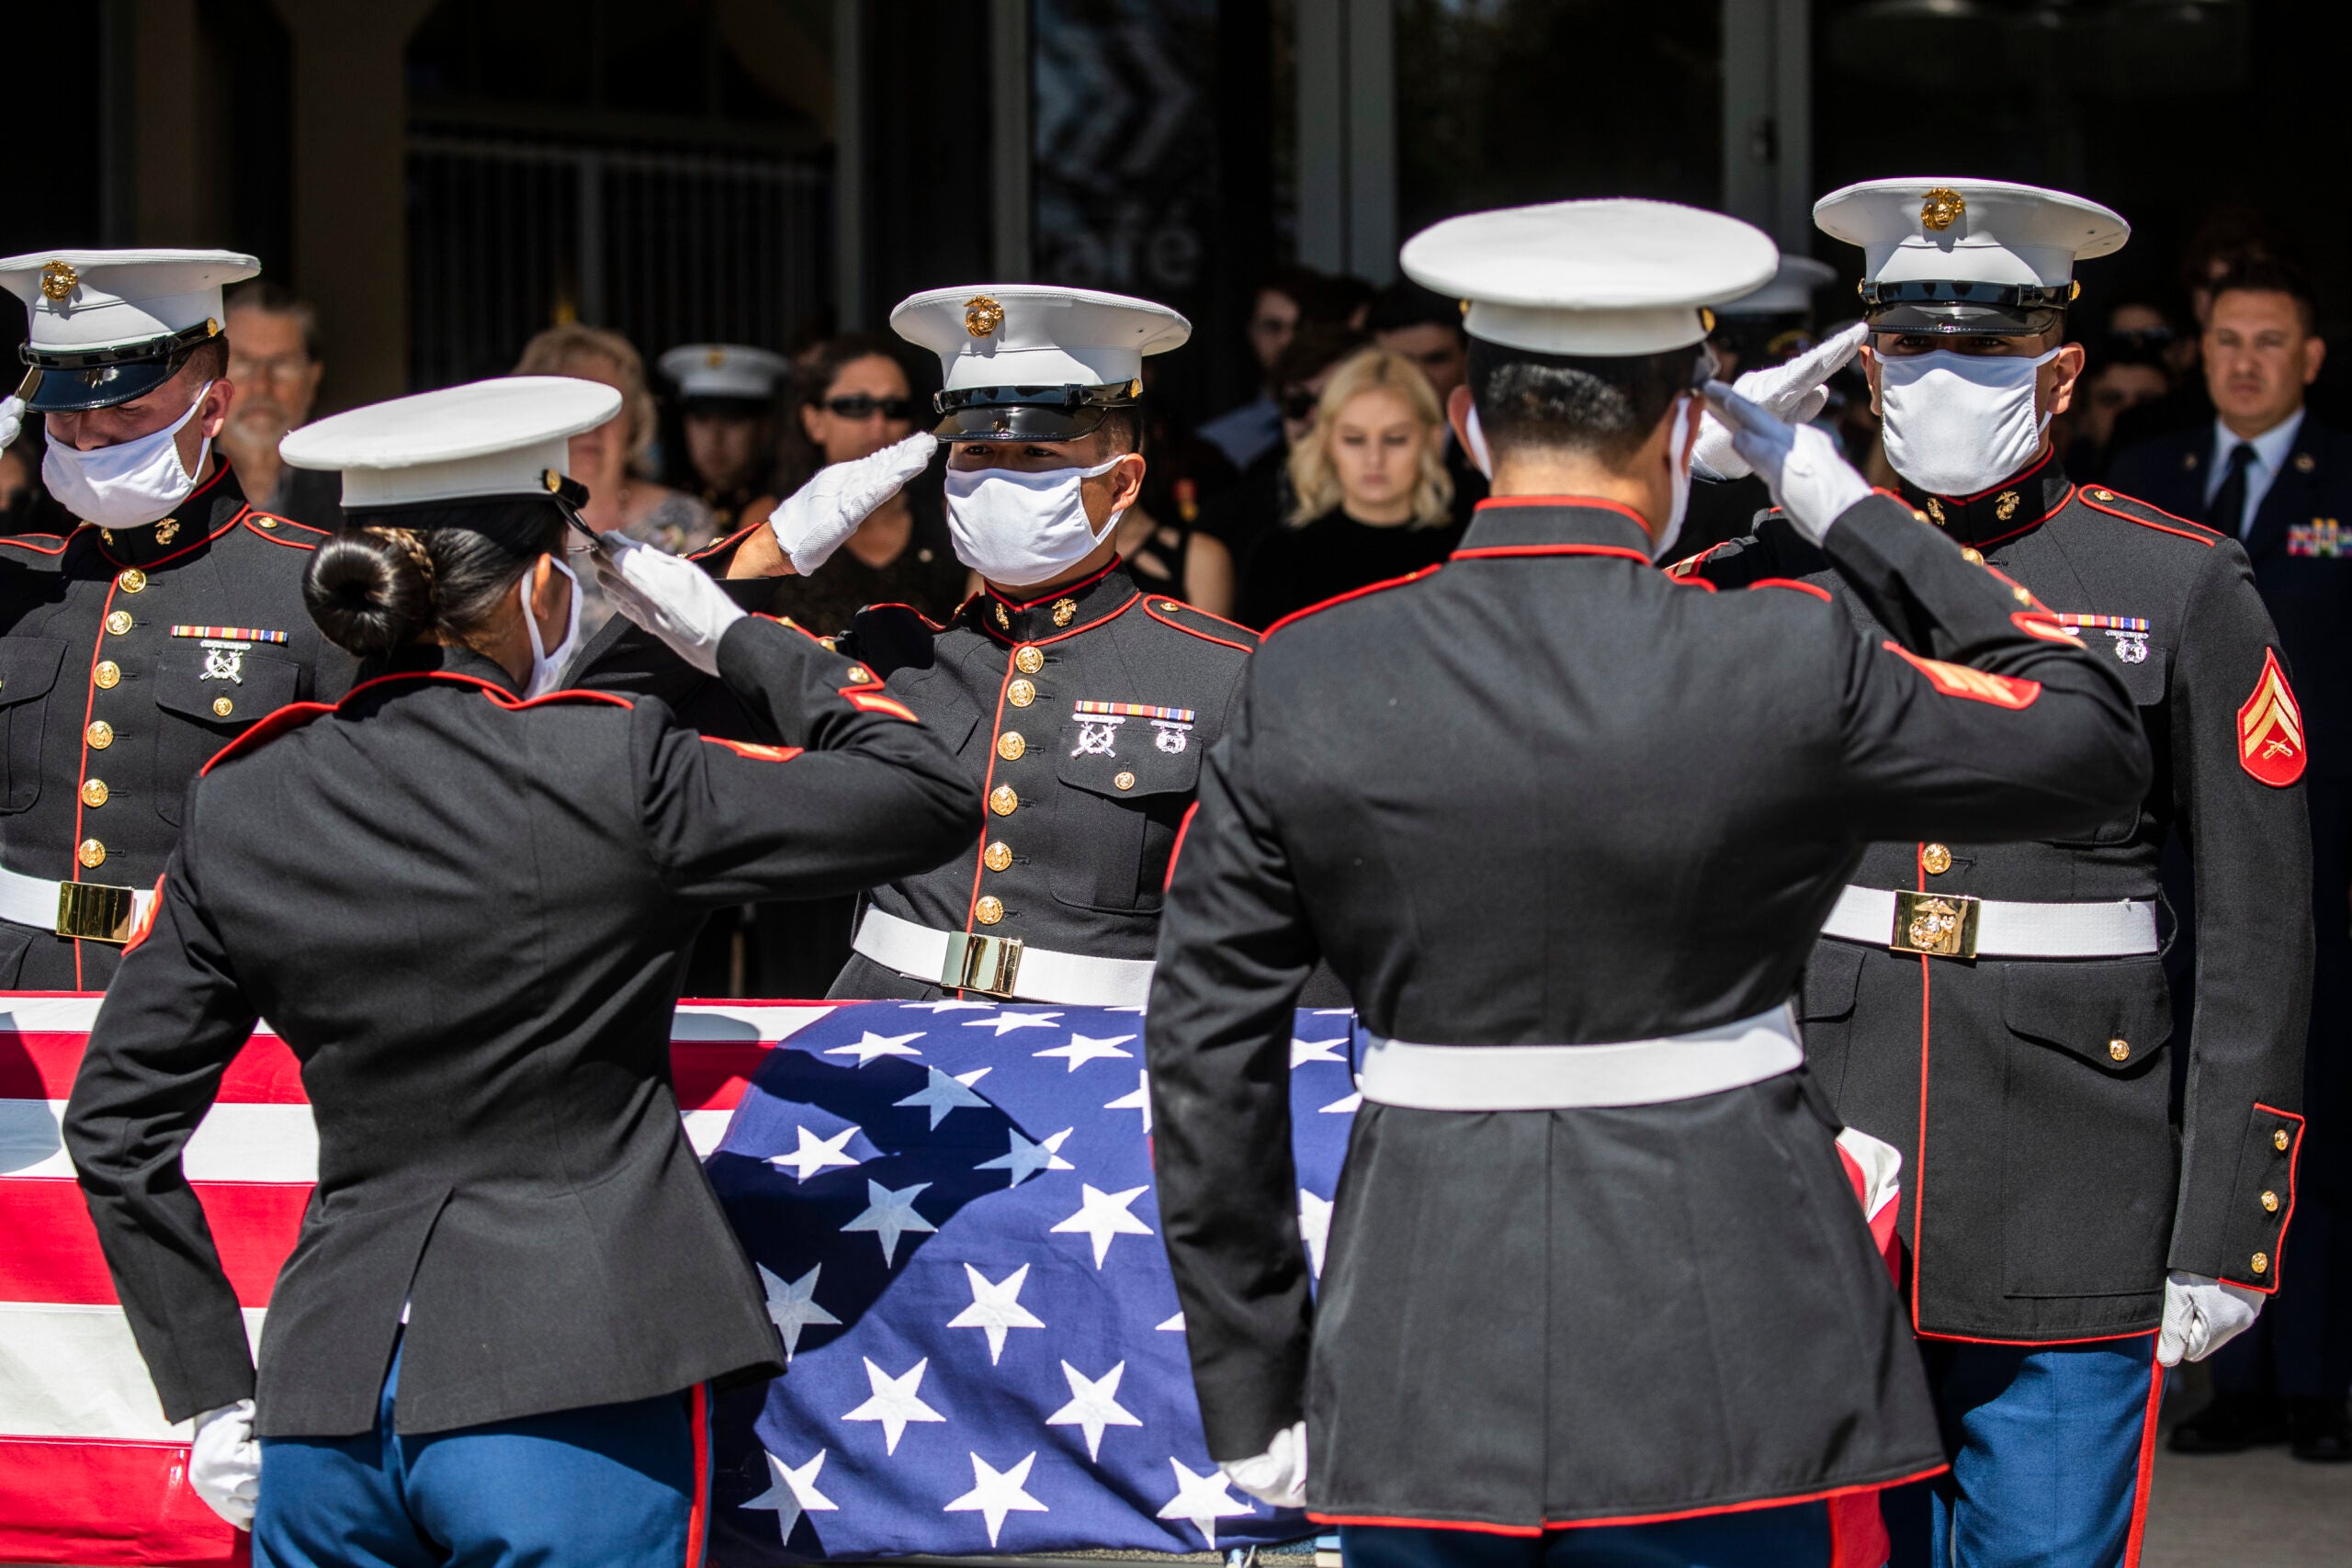 ROSEVILLE, CA - SEPT. 18: U.S. Marines pallbearers salute the casket of Sgt. Nicole L. Gee during a public memorial service at Bayside Church Adventure Campus in Roseville, Calif. Saturday, Sept. 18, 2021. Gee, 23, assigned to Combat Logistics Battalion, 24th Marine Expeditionary Unit, II Marine Expeditionary Force, Camp Lejeune, North Carolina, died in a bombing attack at Hamid Karzai International Airport in Kabul, Afghanistan on August 26, along with 12 other U.S. service members. (Stephen Lam/The San Francisco Chronicle via Getty Images)